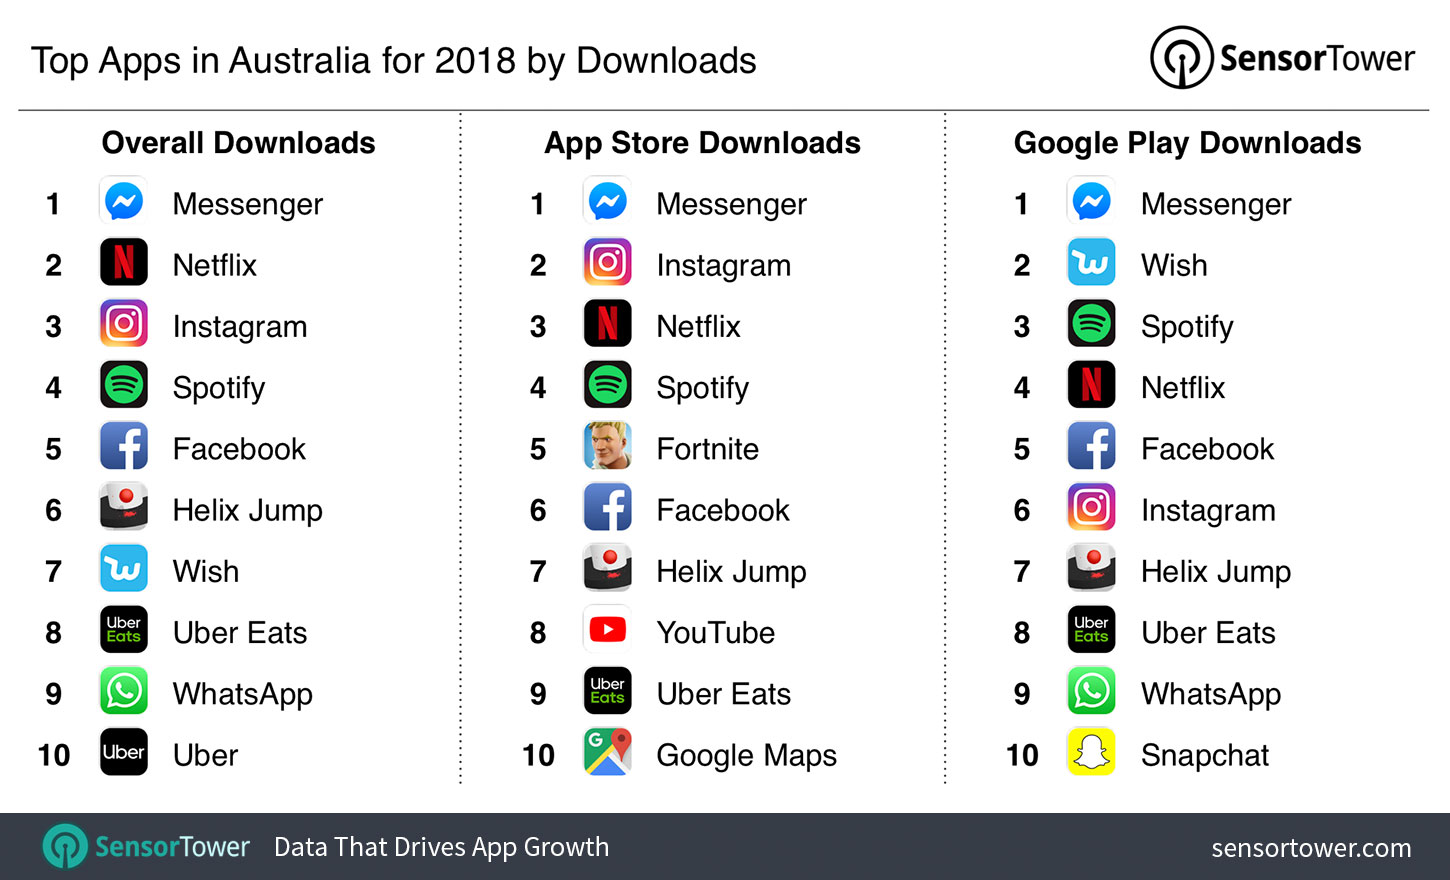 Top Apps in Australia for 2018 by Downloads